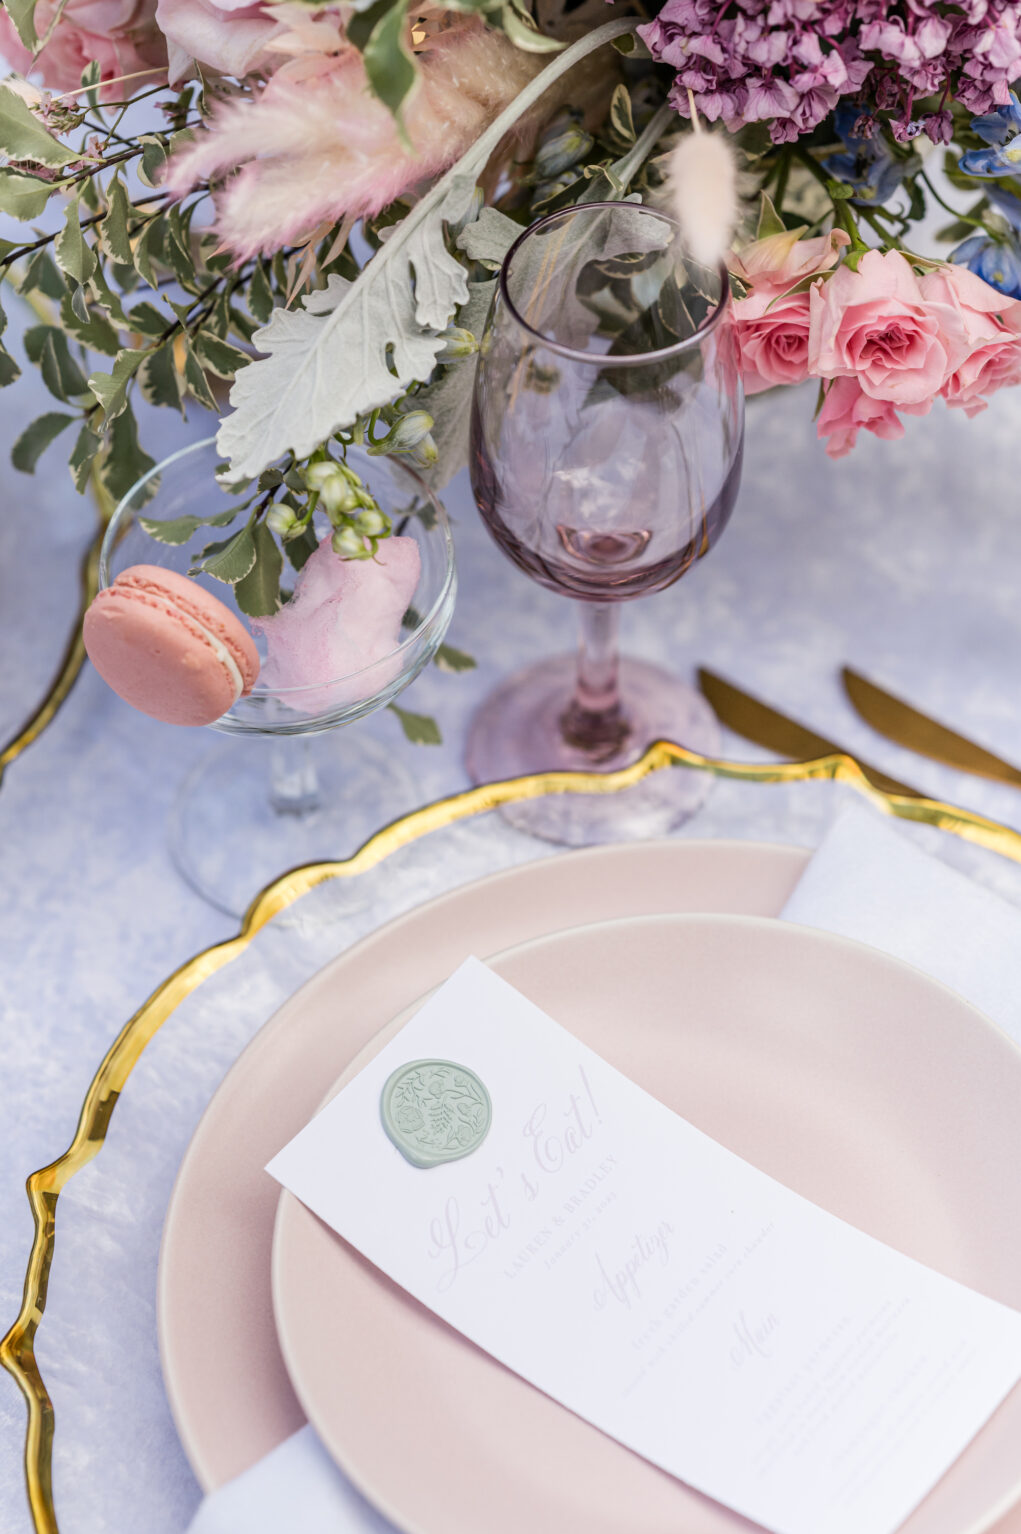 Macaron and Cotton Candy Cocktail Wedding Reception Treat Ideas | Purple Colored Glassware, Gold-rimmed Chargers and Blush Pink Plates Inspiration